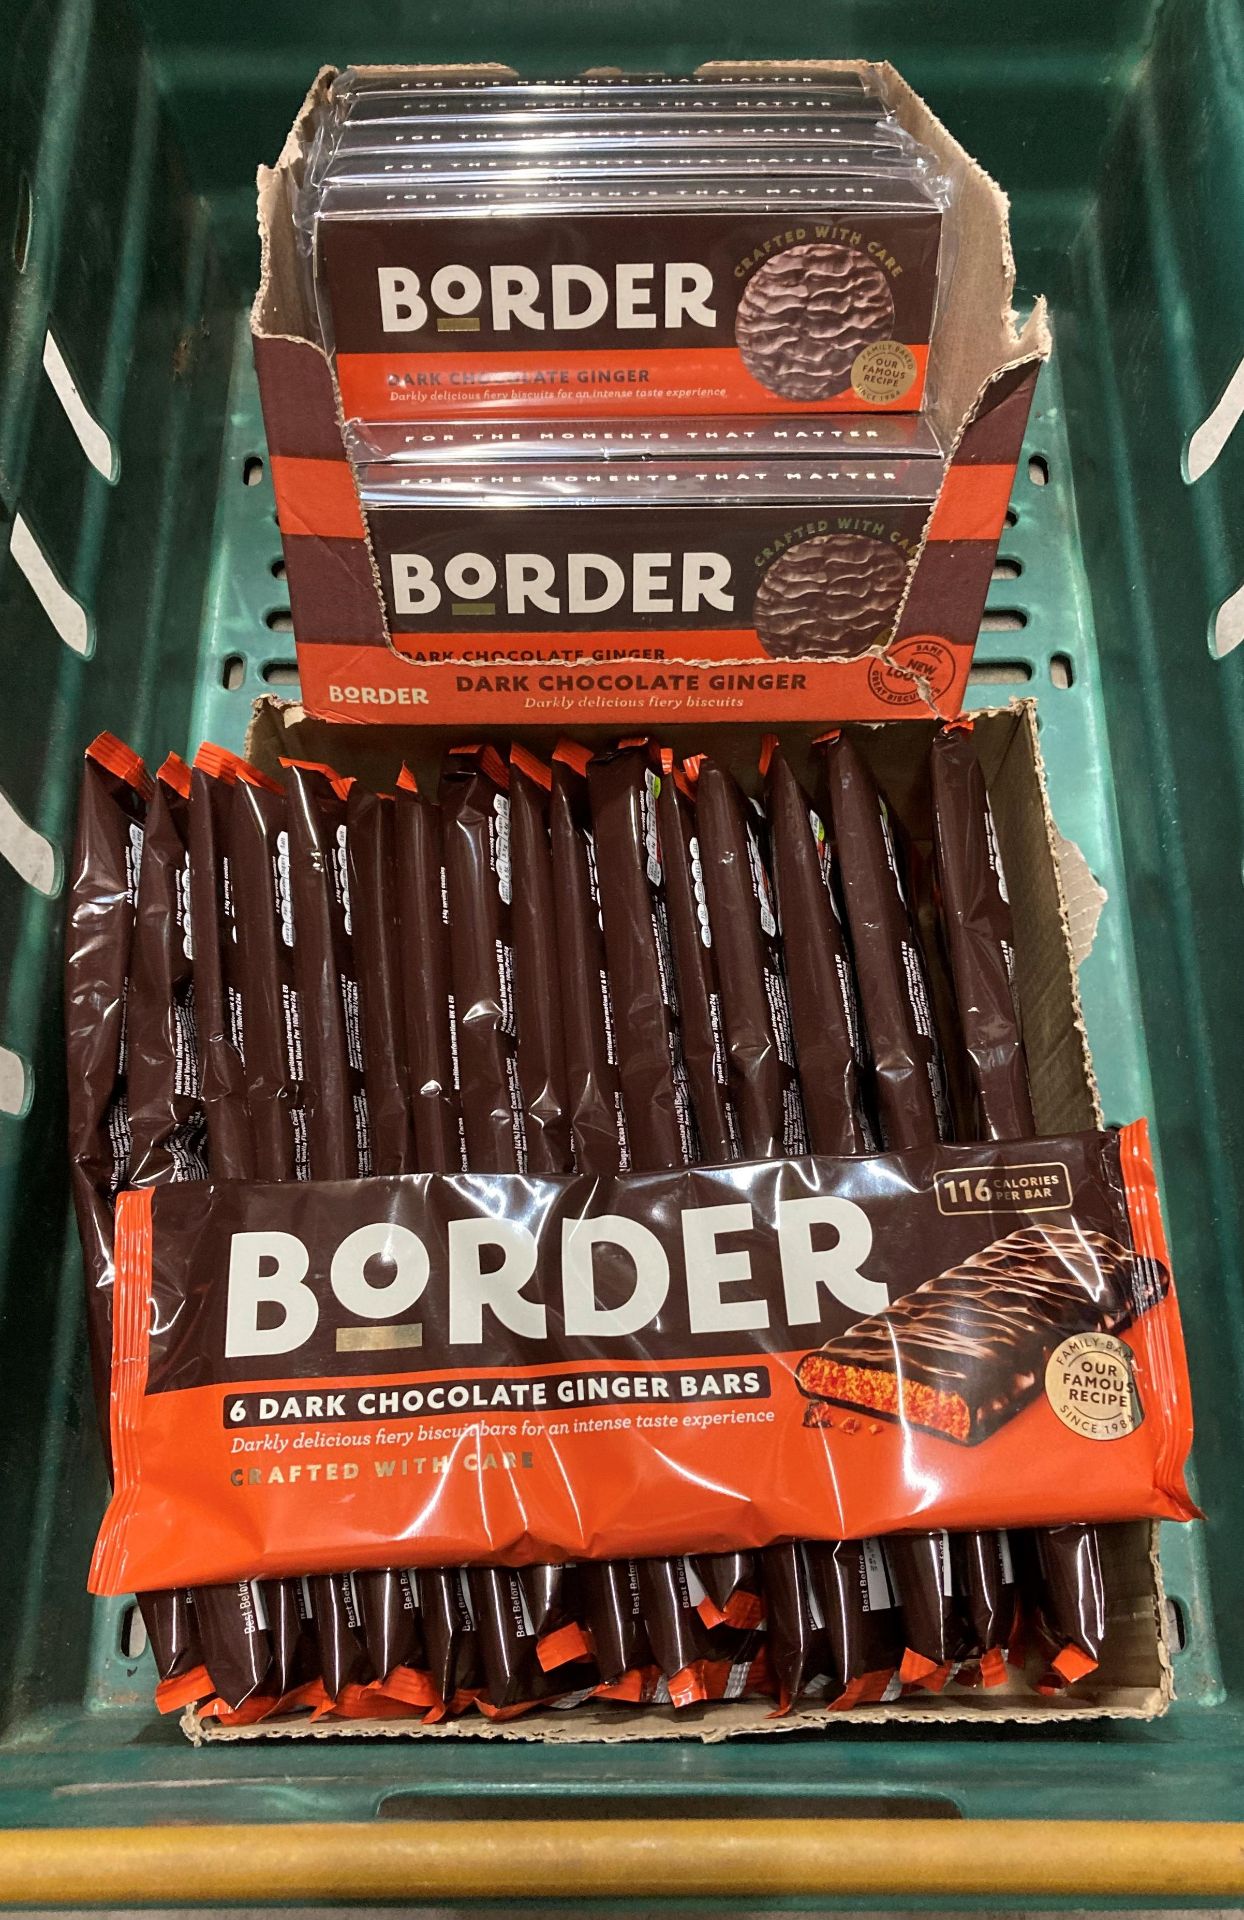 Contents to tray - 12 x boxes of 150g Border's dark chocolate gingers and 17 x 6 bar packs of